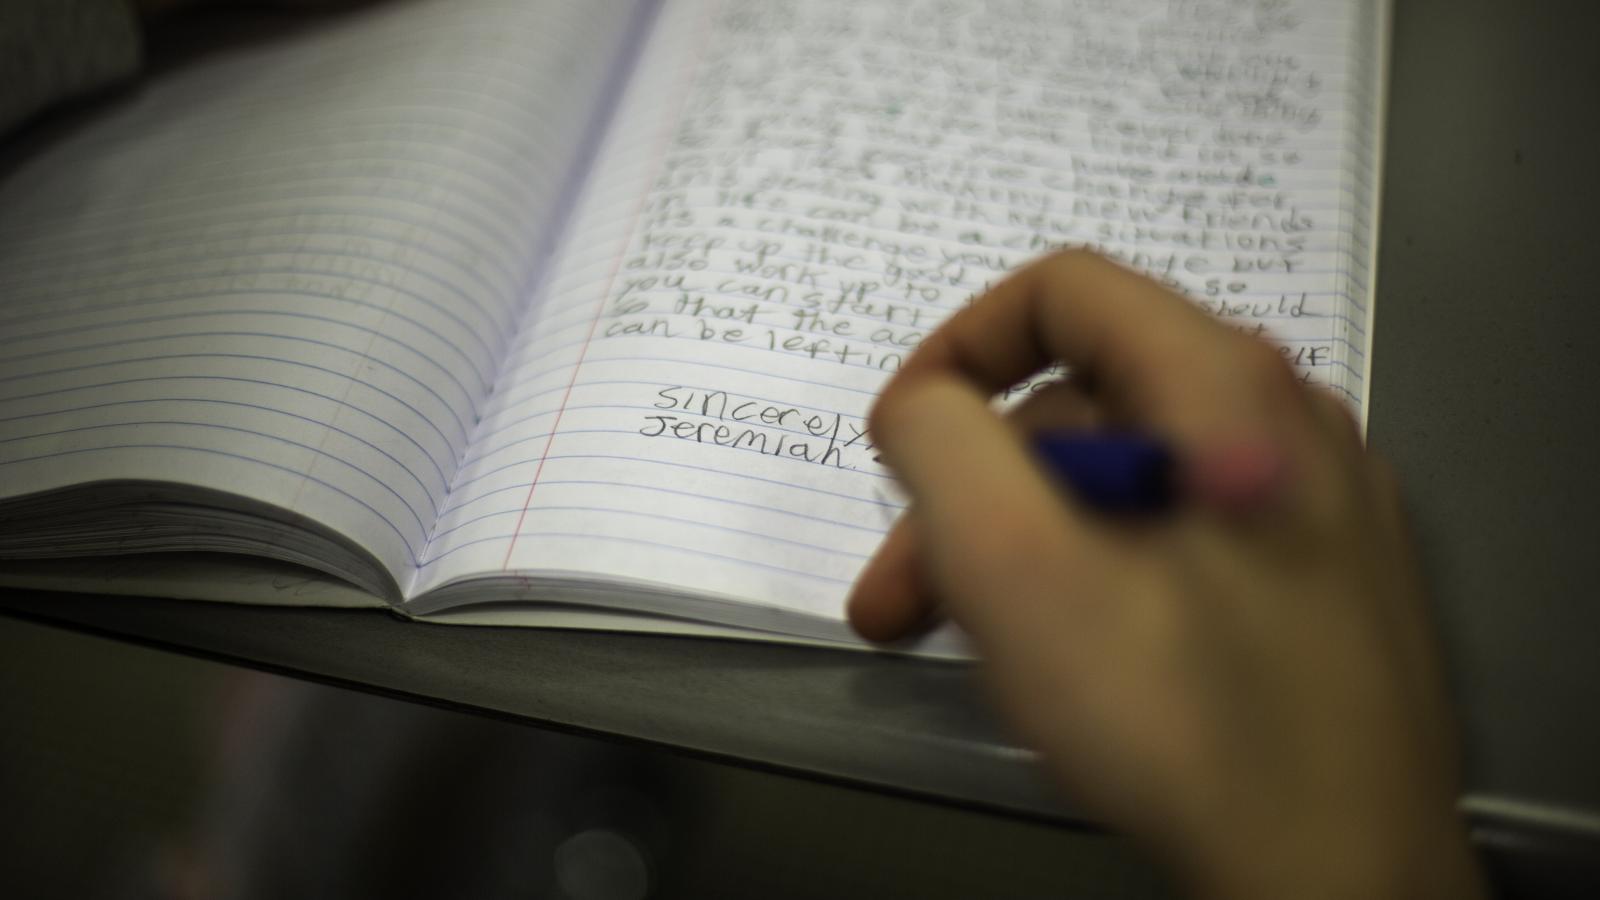 Close-up view of a handwritten passage in a student's composition book